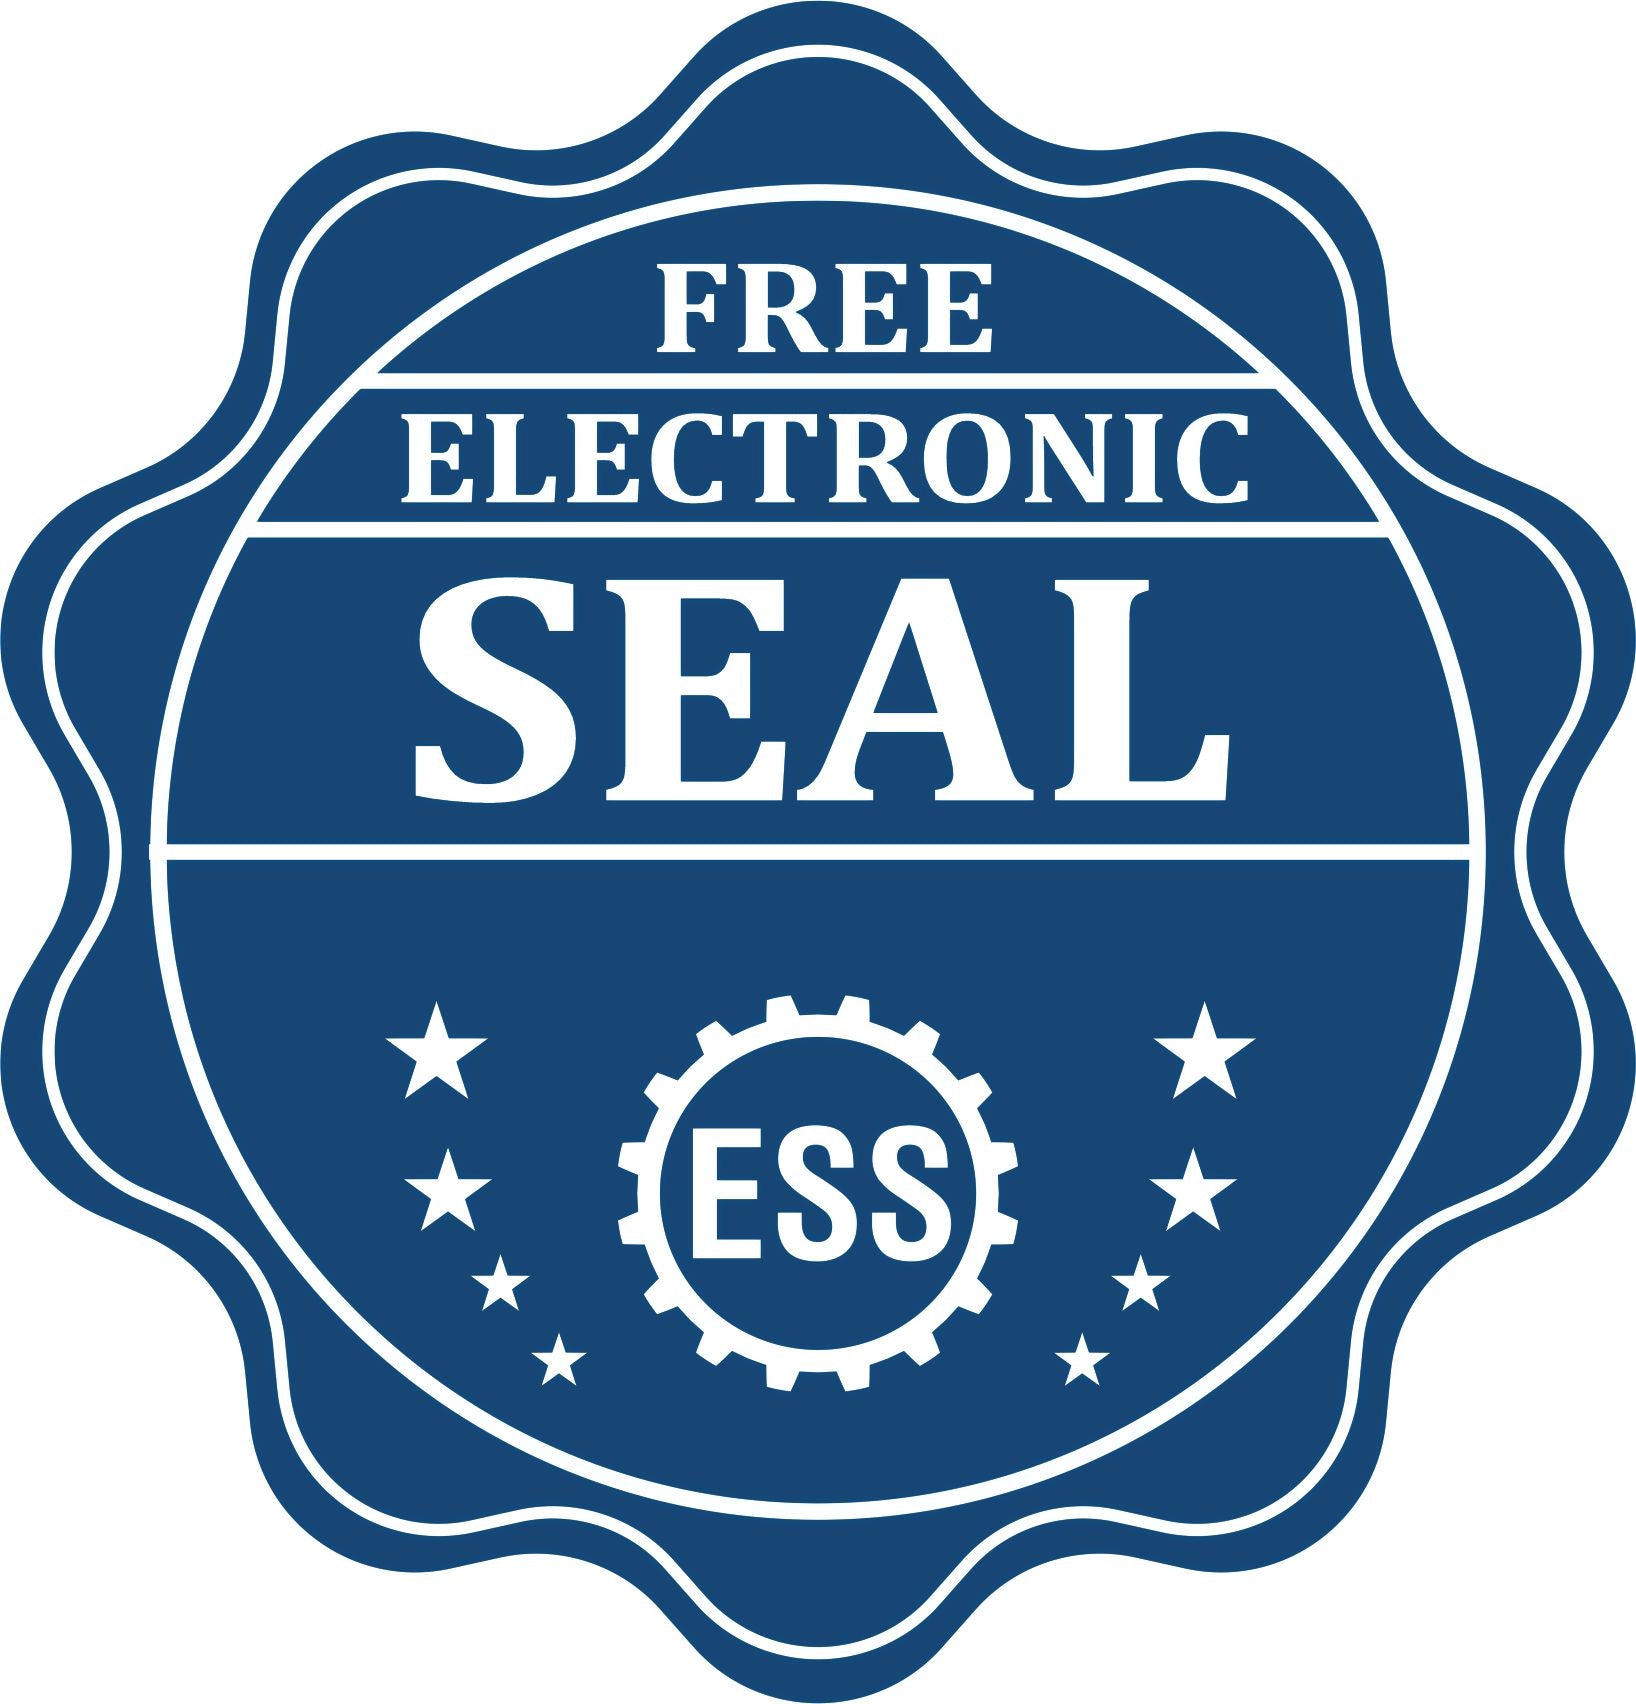 A badge showing a free electronic seal for the Soft District of Columbia Professional Engineer Seal with stars and the ESS gear on the emblem.